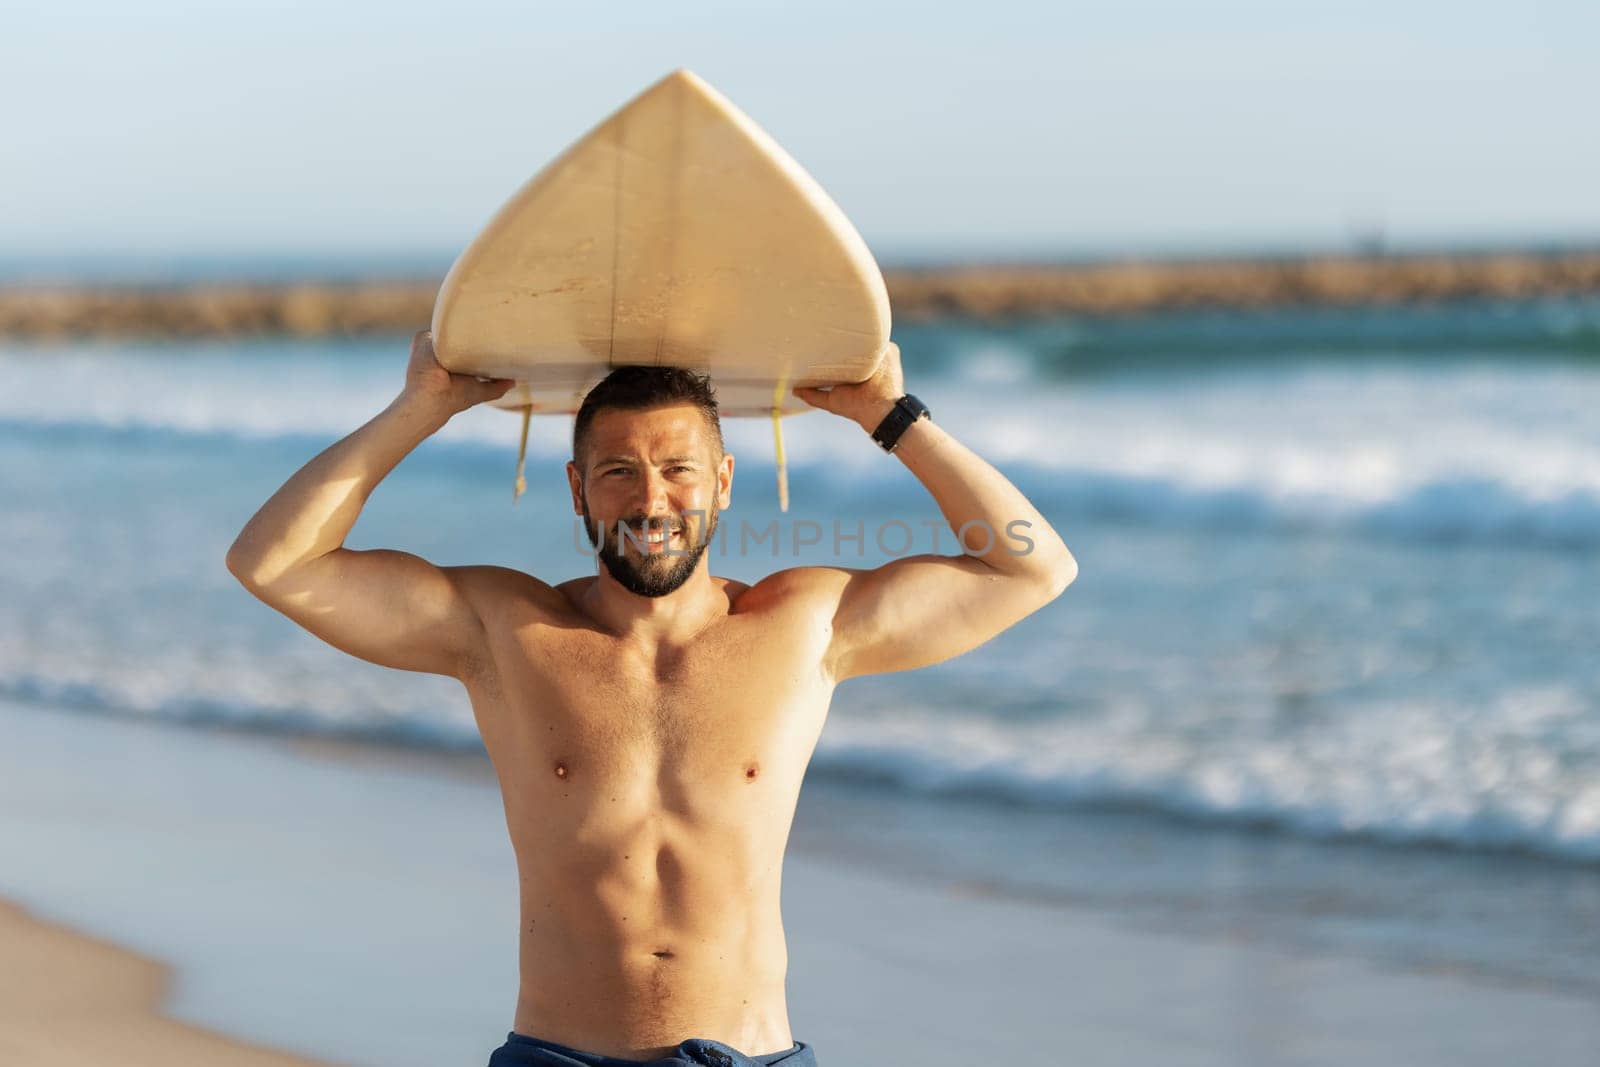 A man surfer with naked torso holding a surfing board over his head. Mid shot